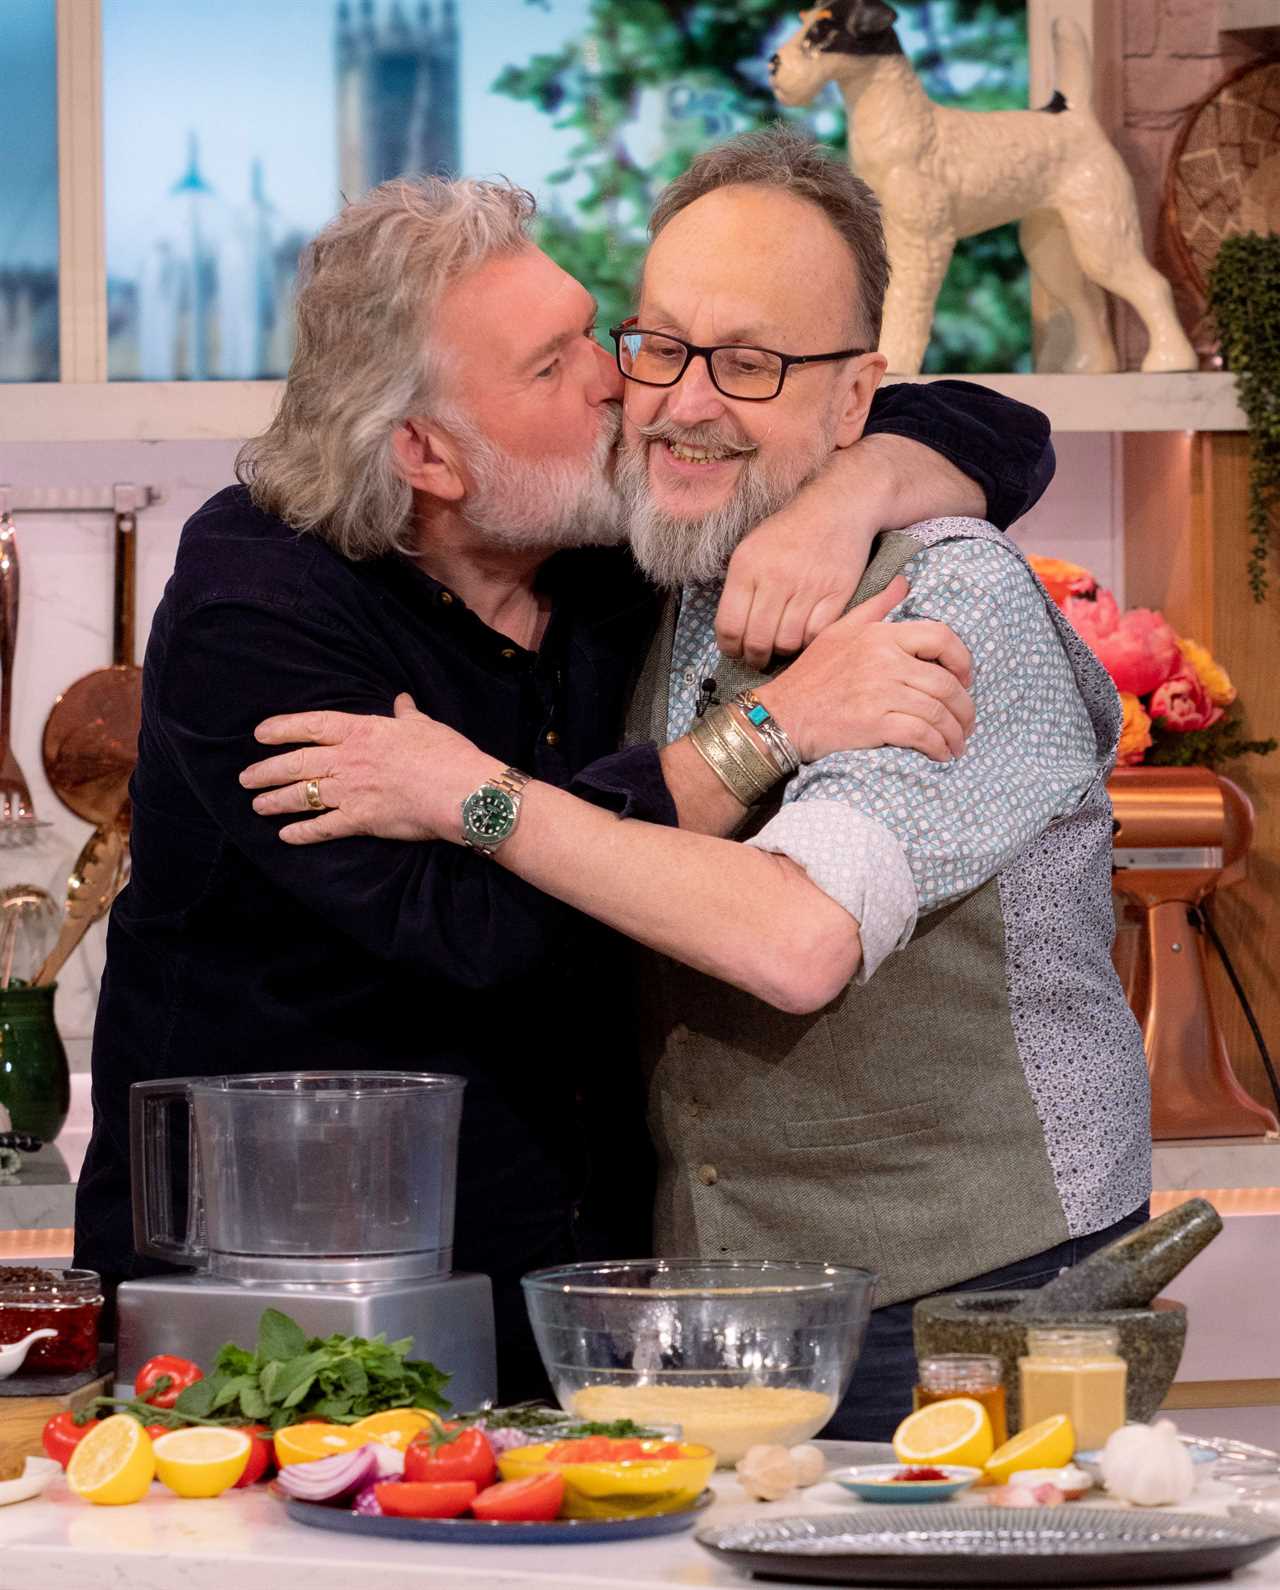 Si King confirms end of Hairy Bikers brand after co-star Dave Myers' passing